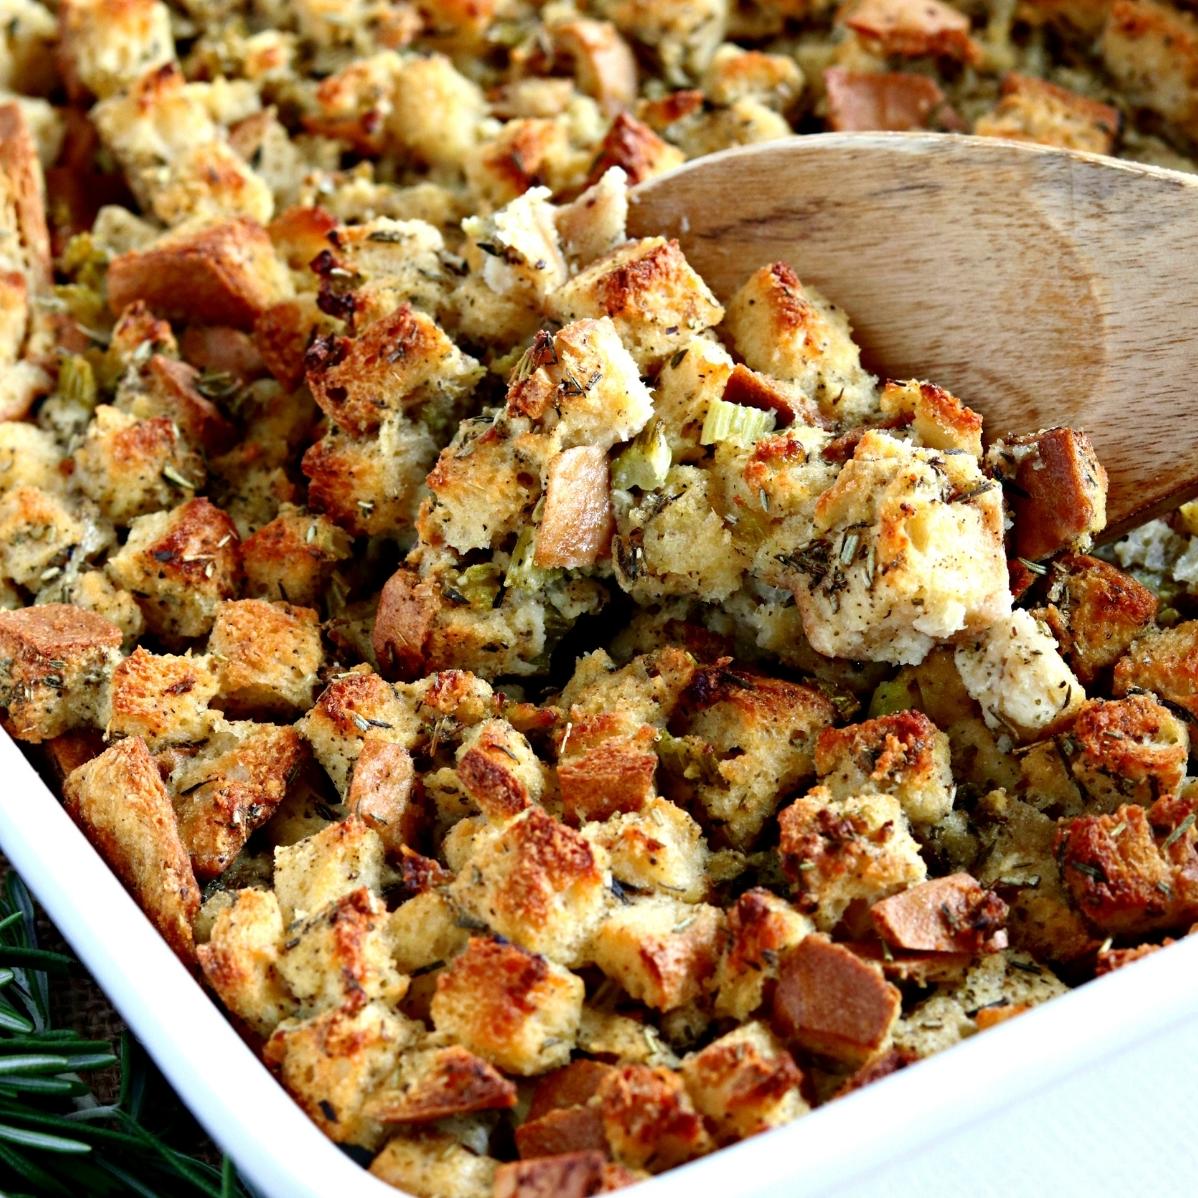  No gluten, no problem! This stuffing is just as hearty and flavorful as the original.